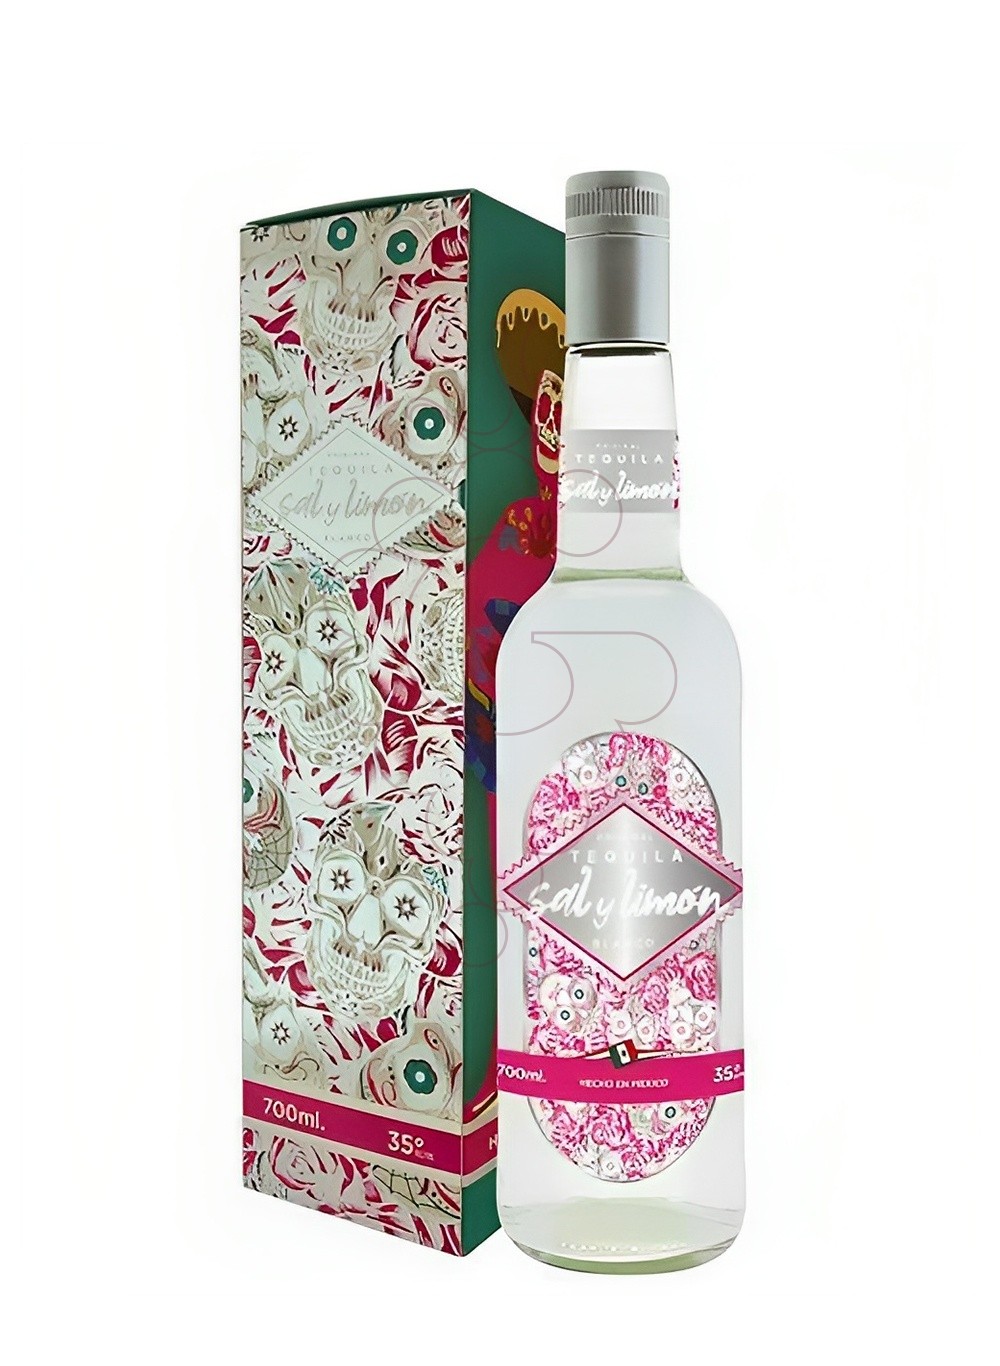 Foto Tequila Tequila sal i limon blanc 70cl